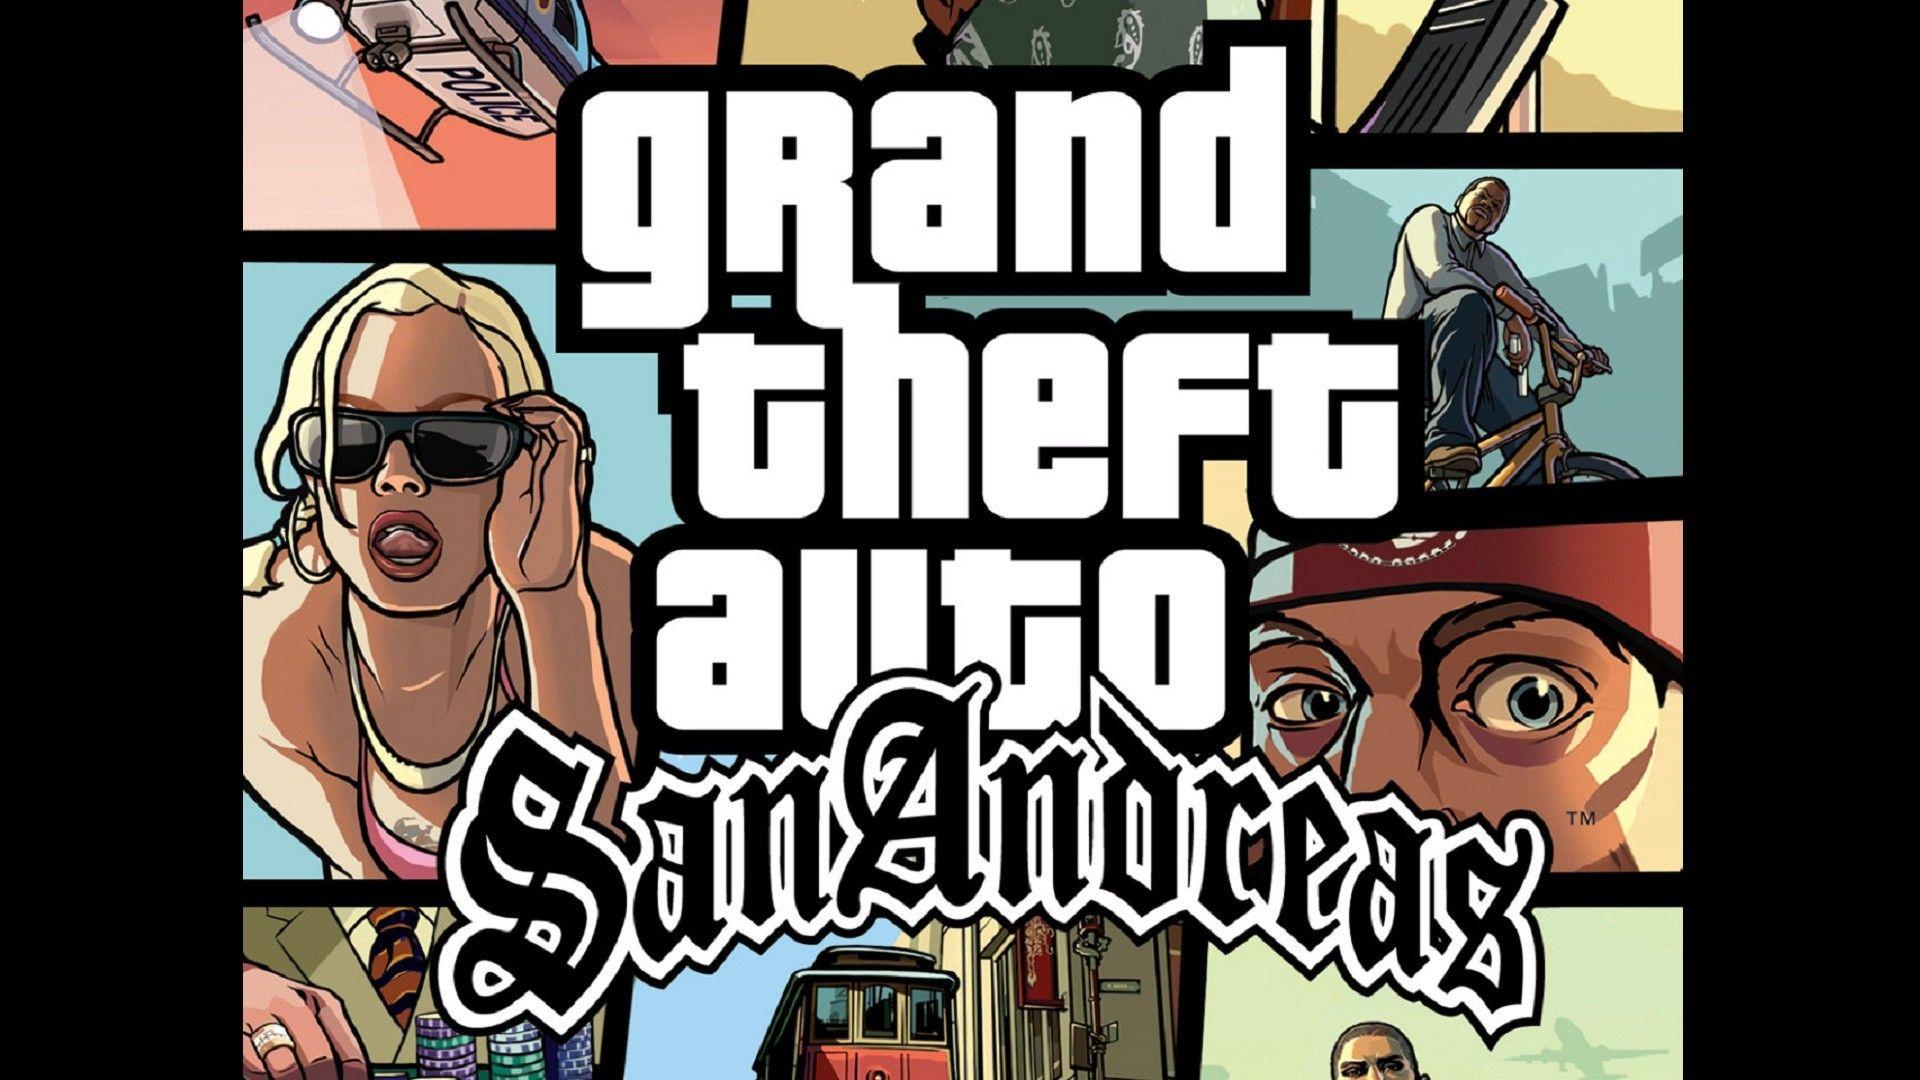 Grand Theft Auto San Andreas Wallpapers Wallpaper Cave